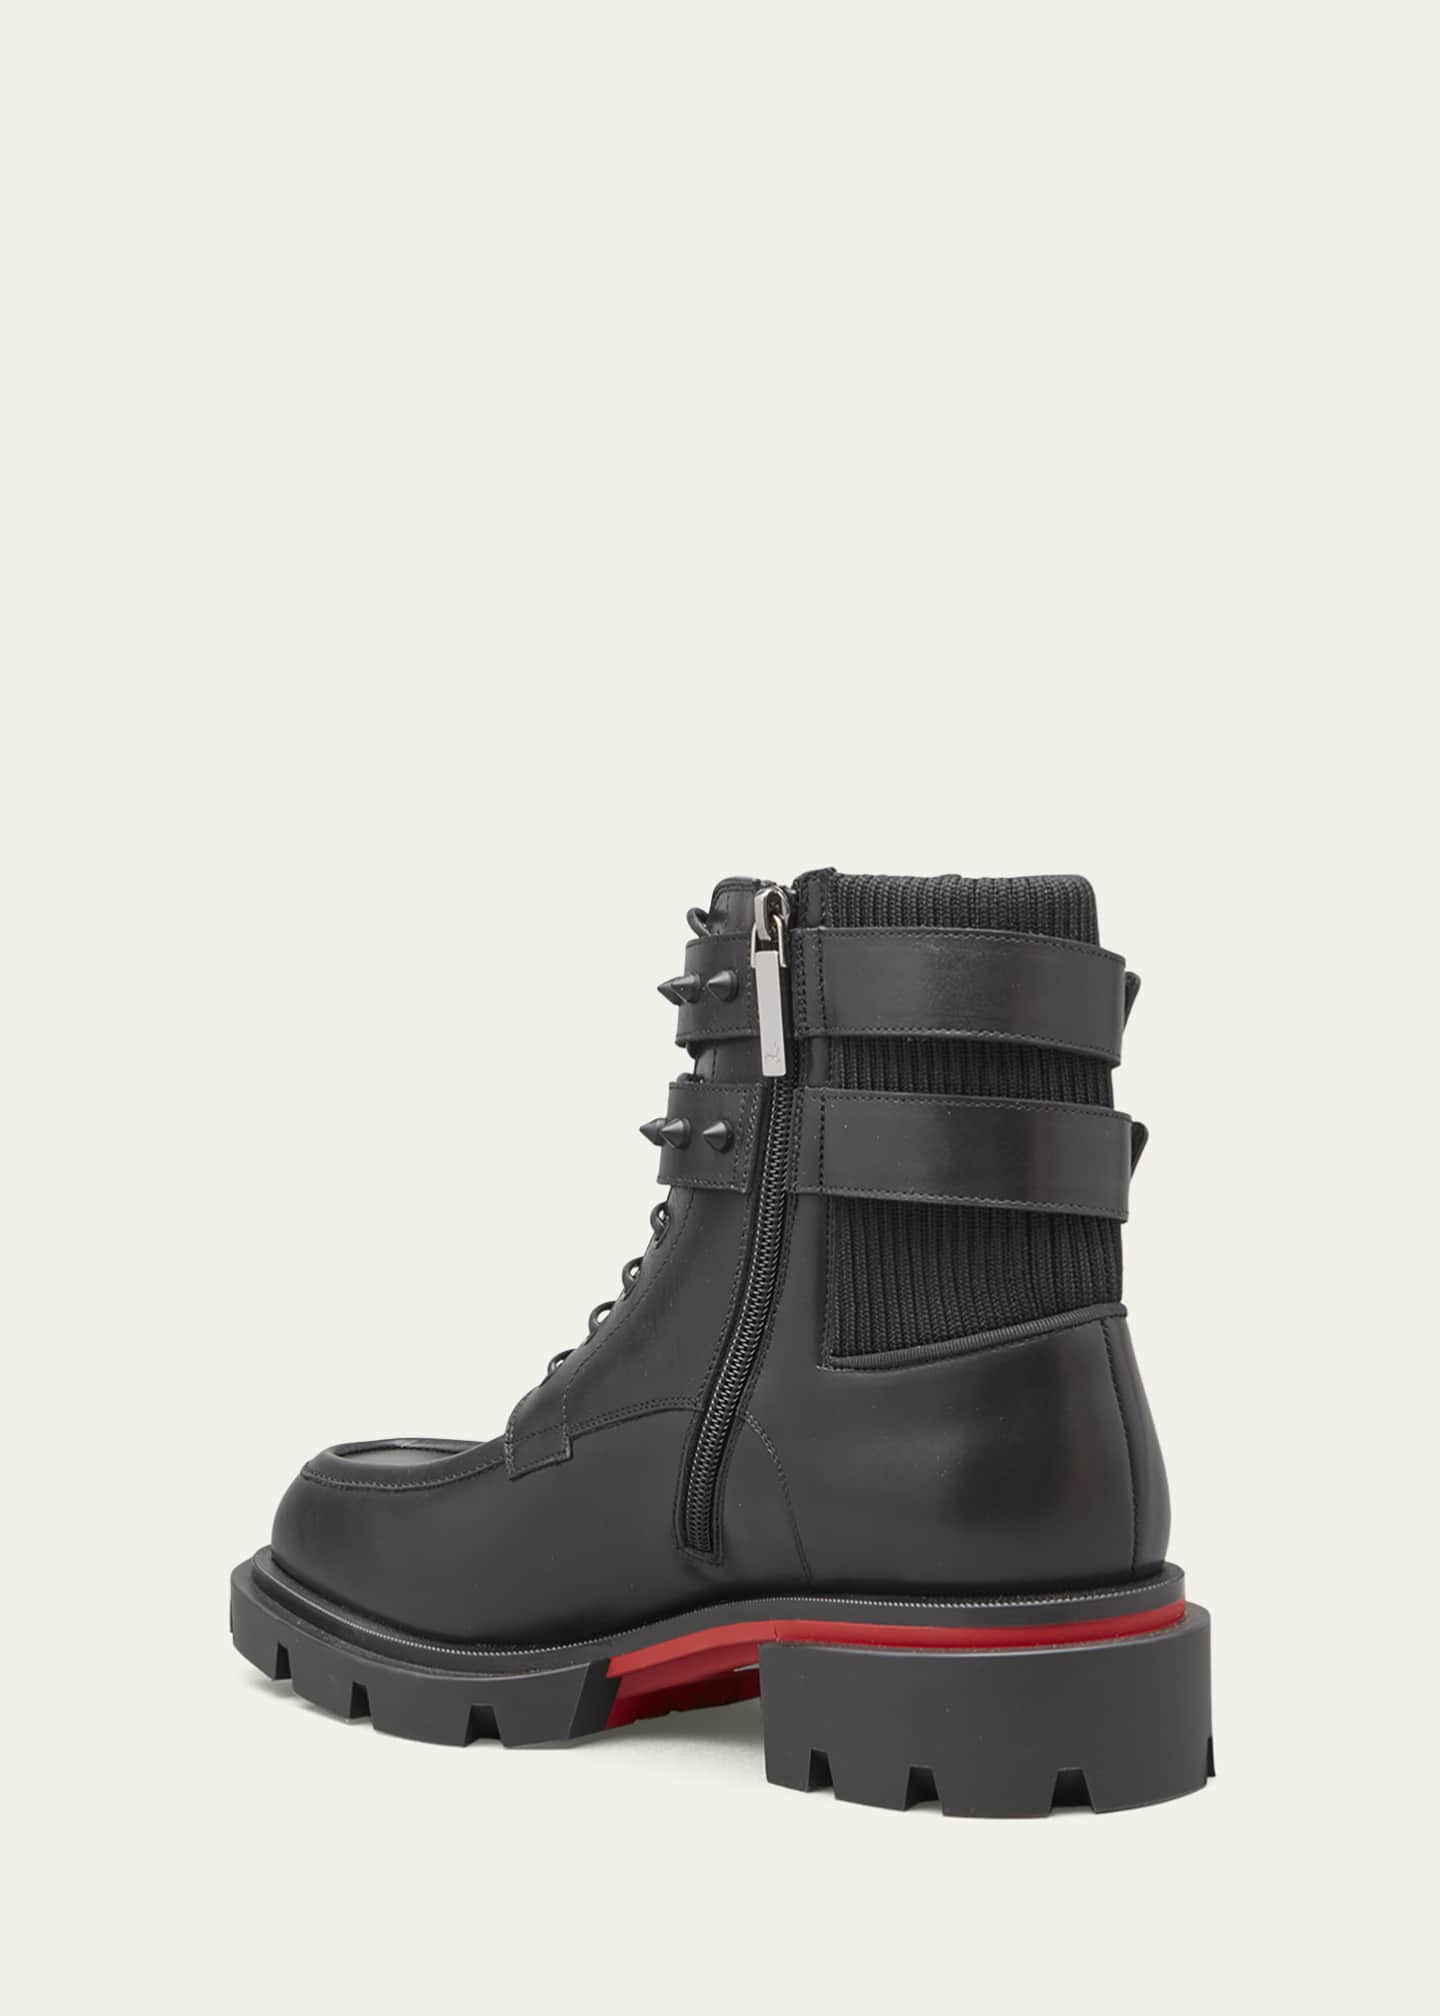 Christian Louboutin Men's Our Fight Zip Leather Combat Boots - Bergdorf  Goodman